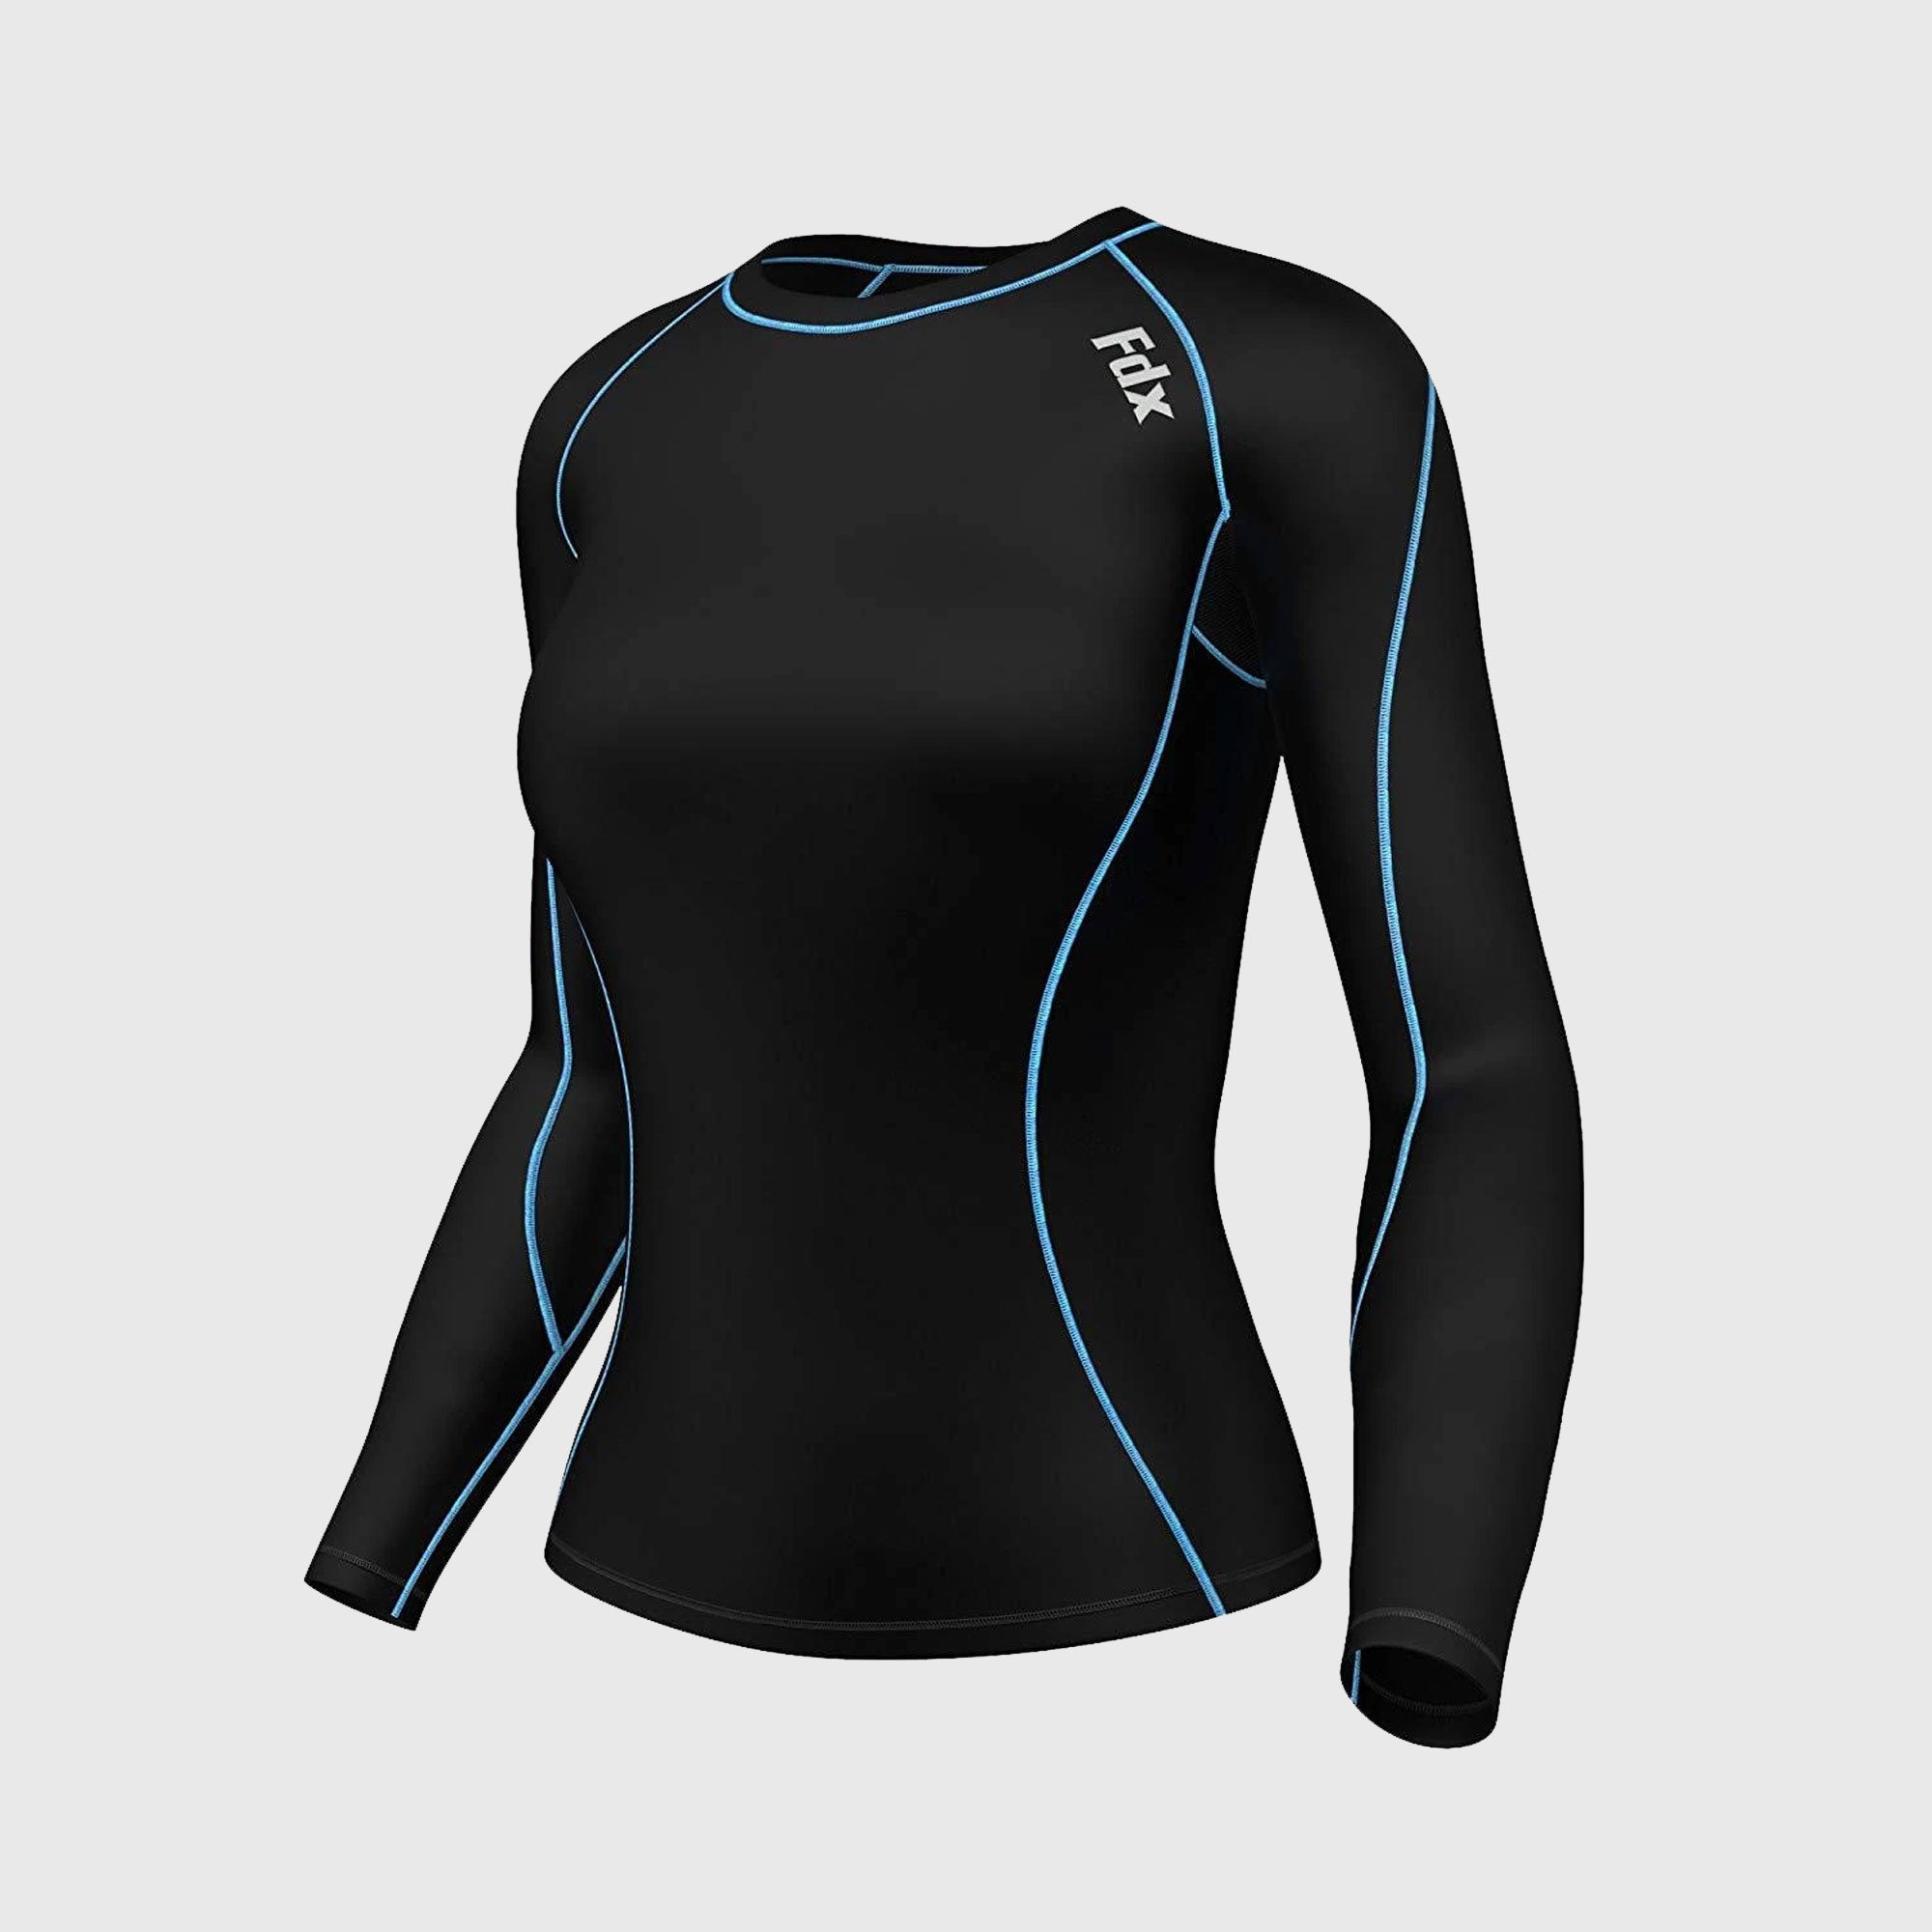 Fdx Monarch Blue Women's Base Layer Long Sleeve Compression Top